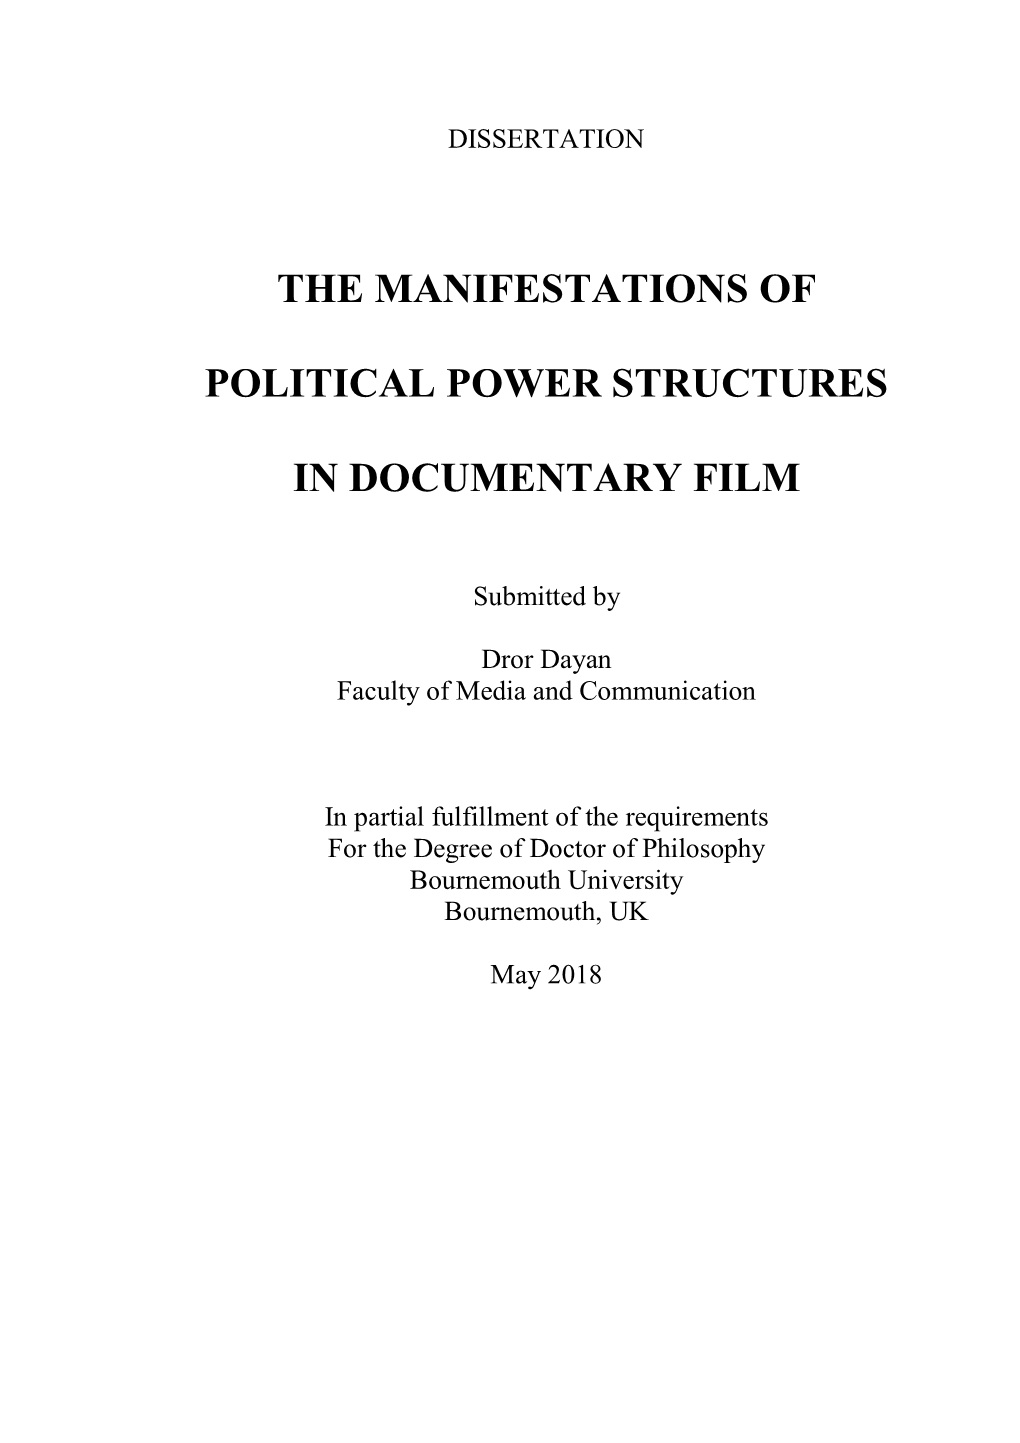 The Manifestations of Political Power Structures in Documentary Film